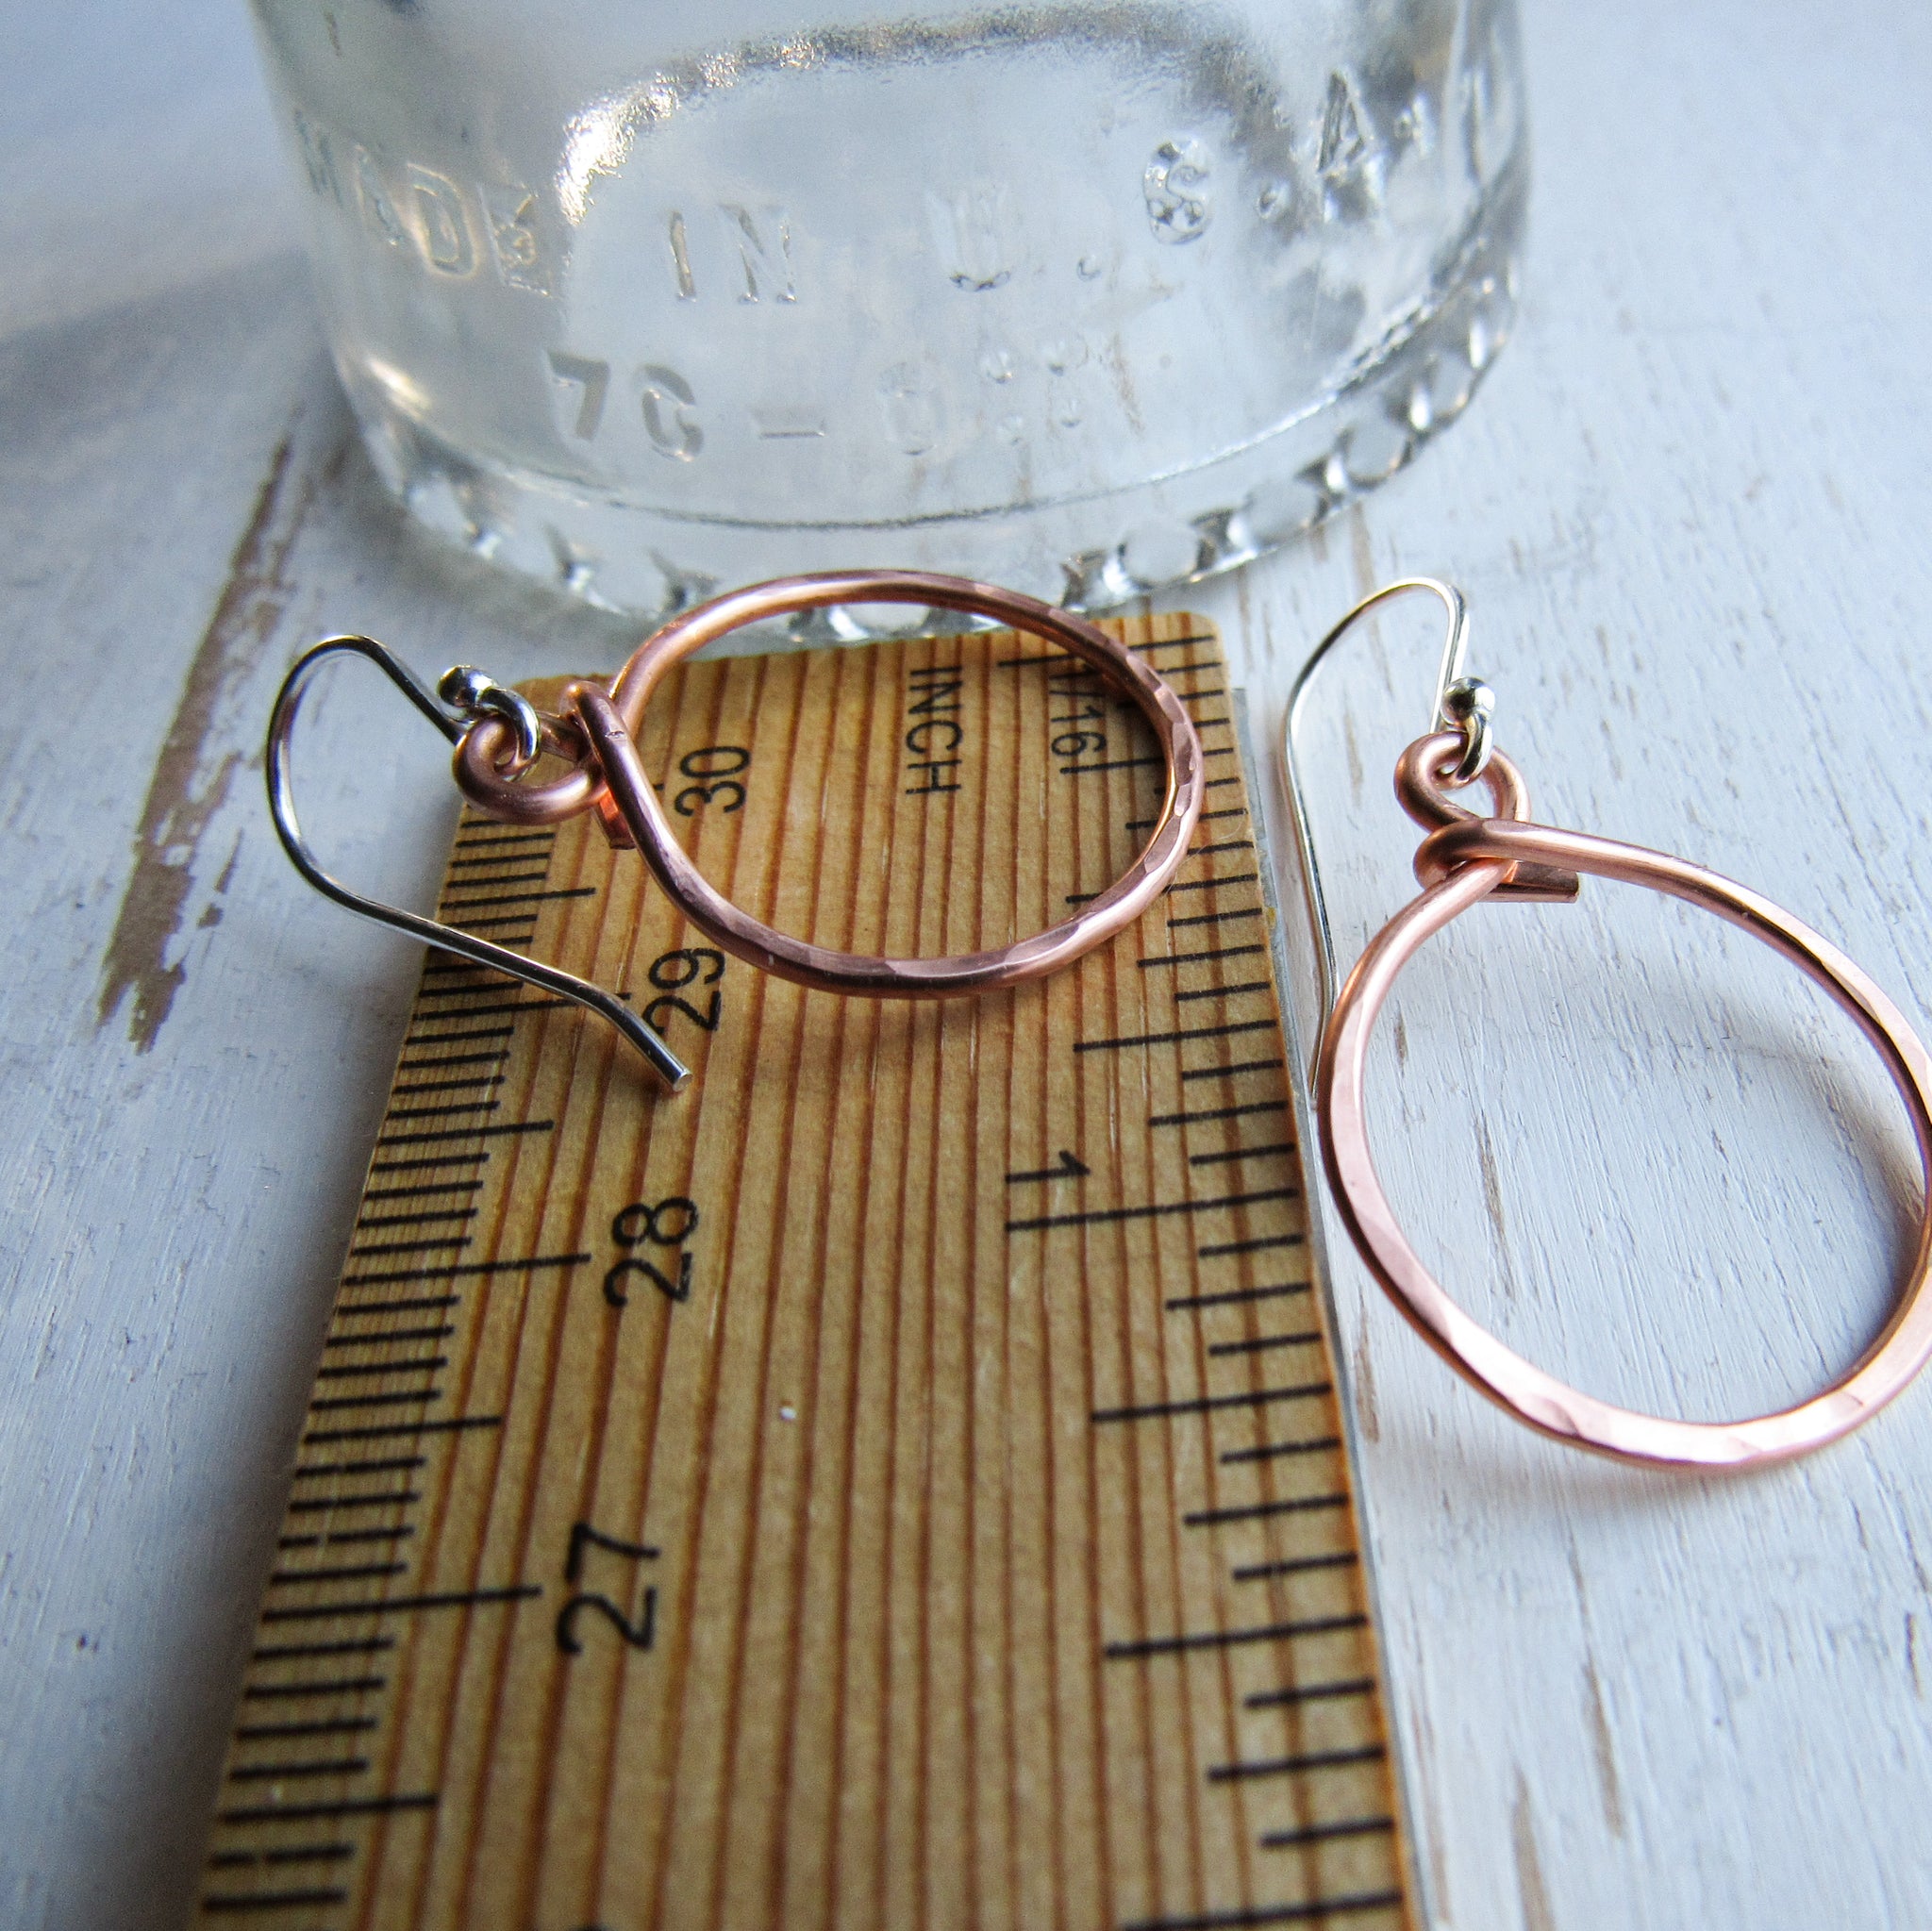 Small Cooper Hoops